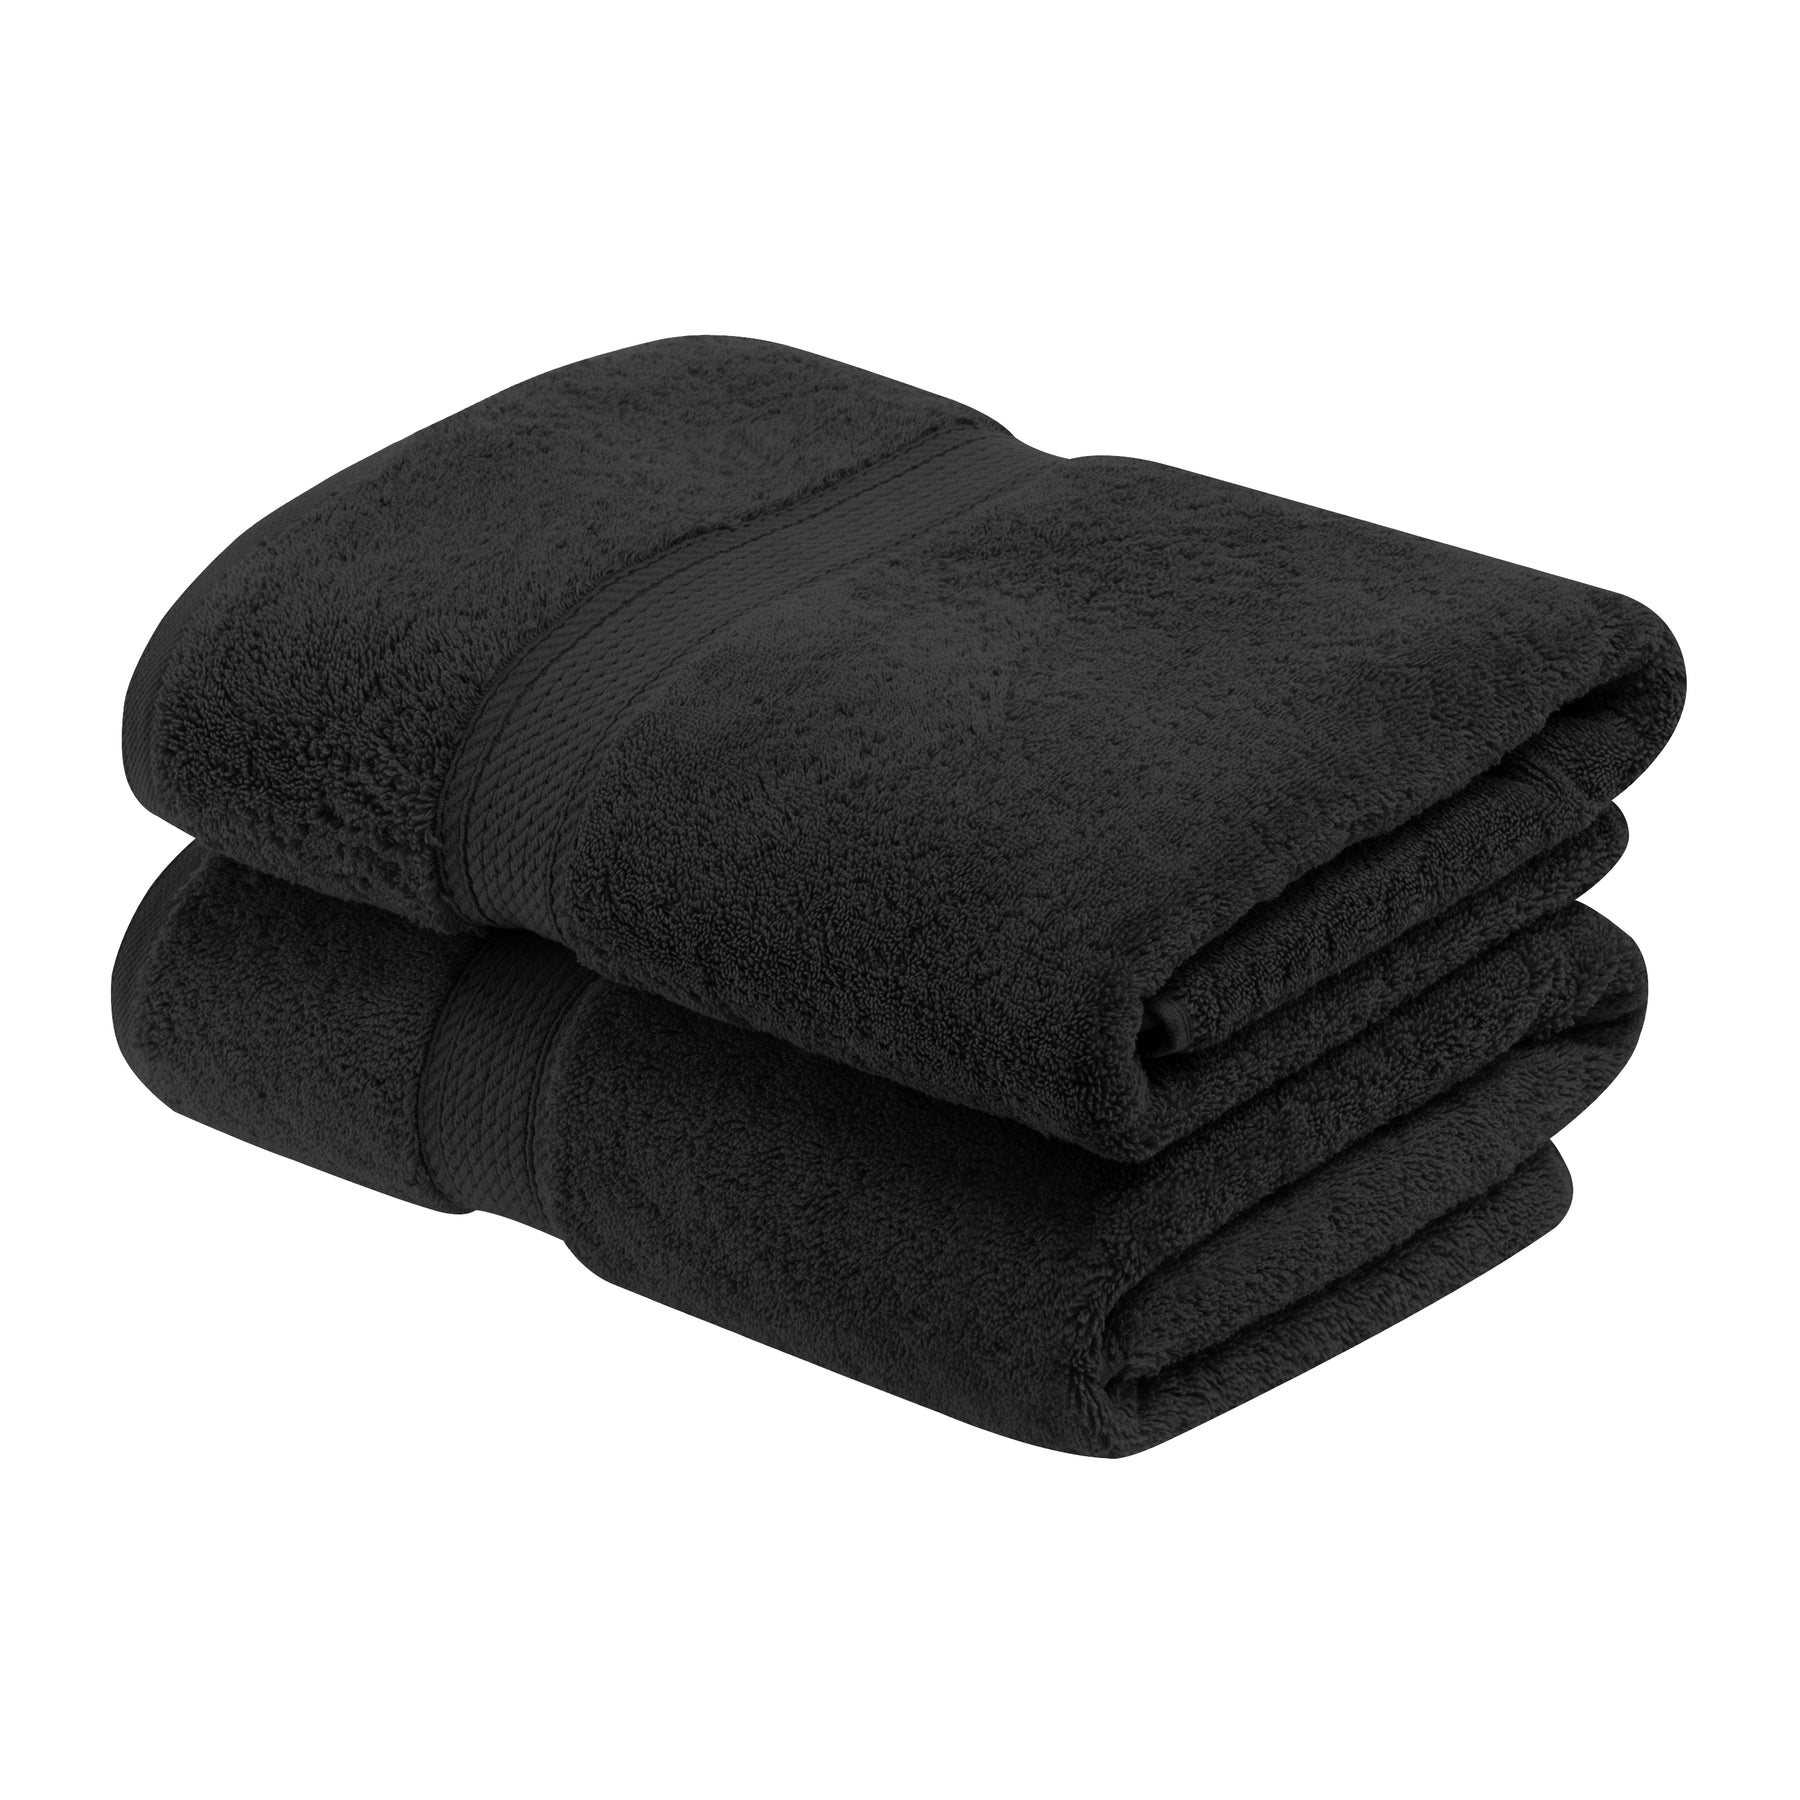 The Benefits of Egyptian Cotton Towels